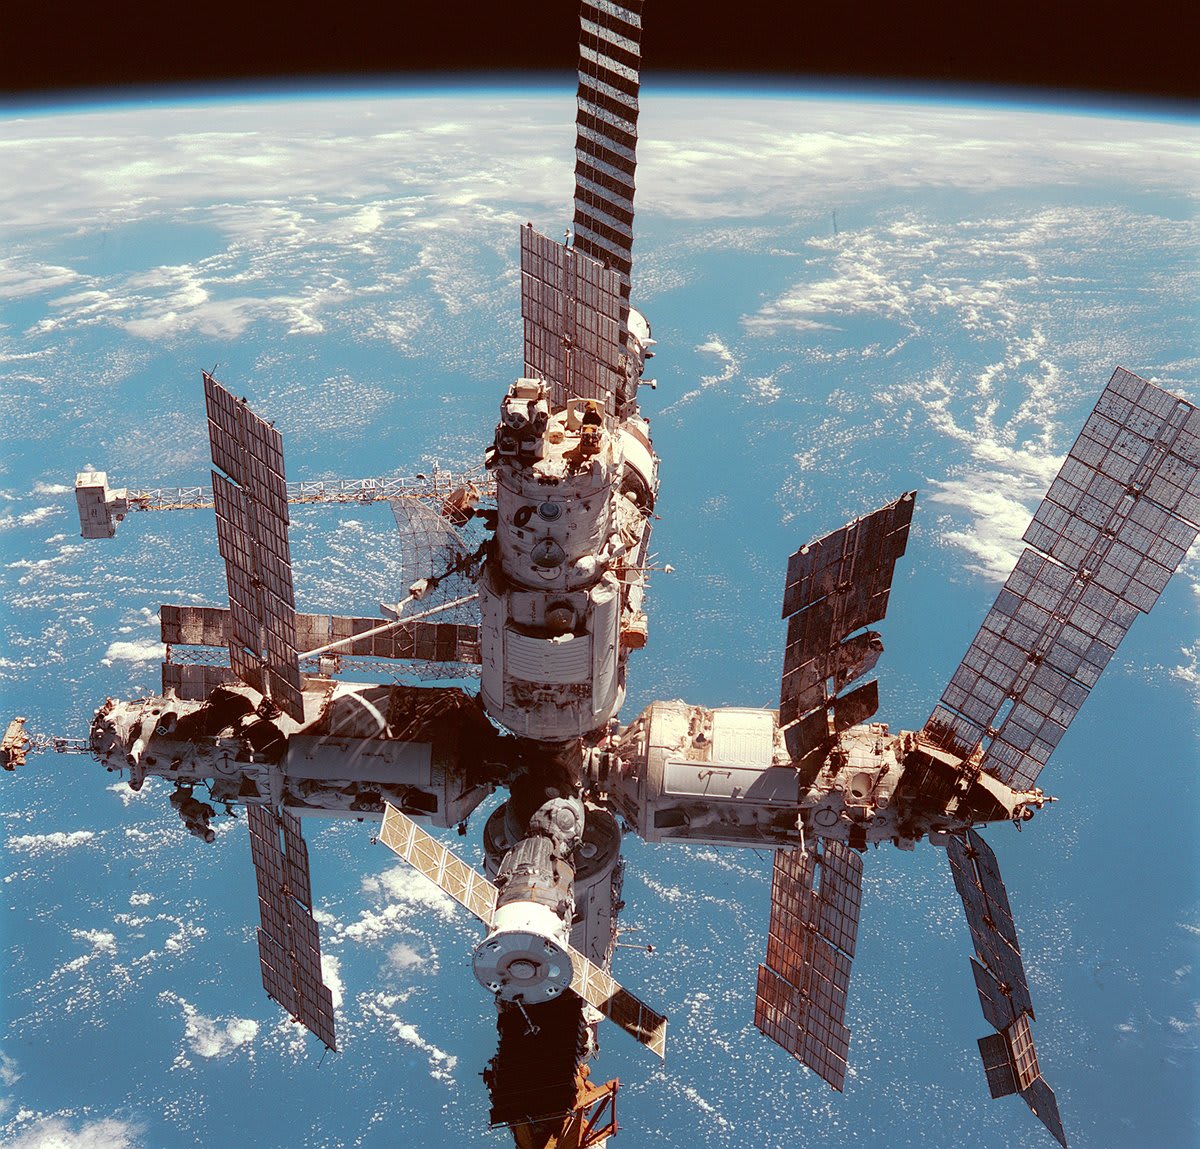 OTD 20 years ago, 23 March 2001, the Russian space station Mir was deorbited after 15 years of operations, during which time 13 European astronauts visited the station 👉